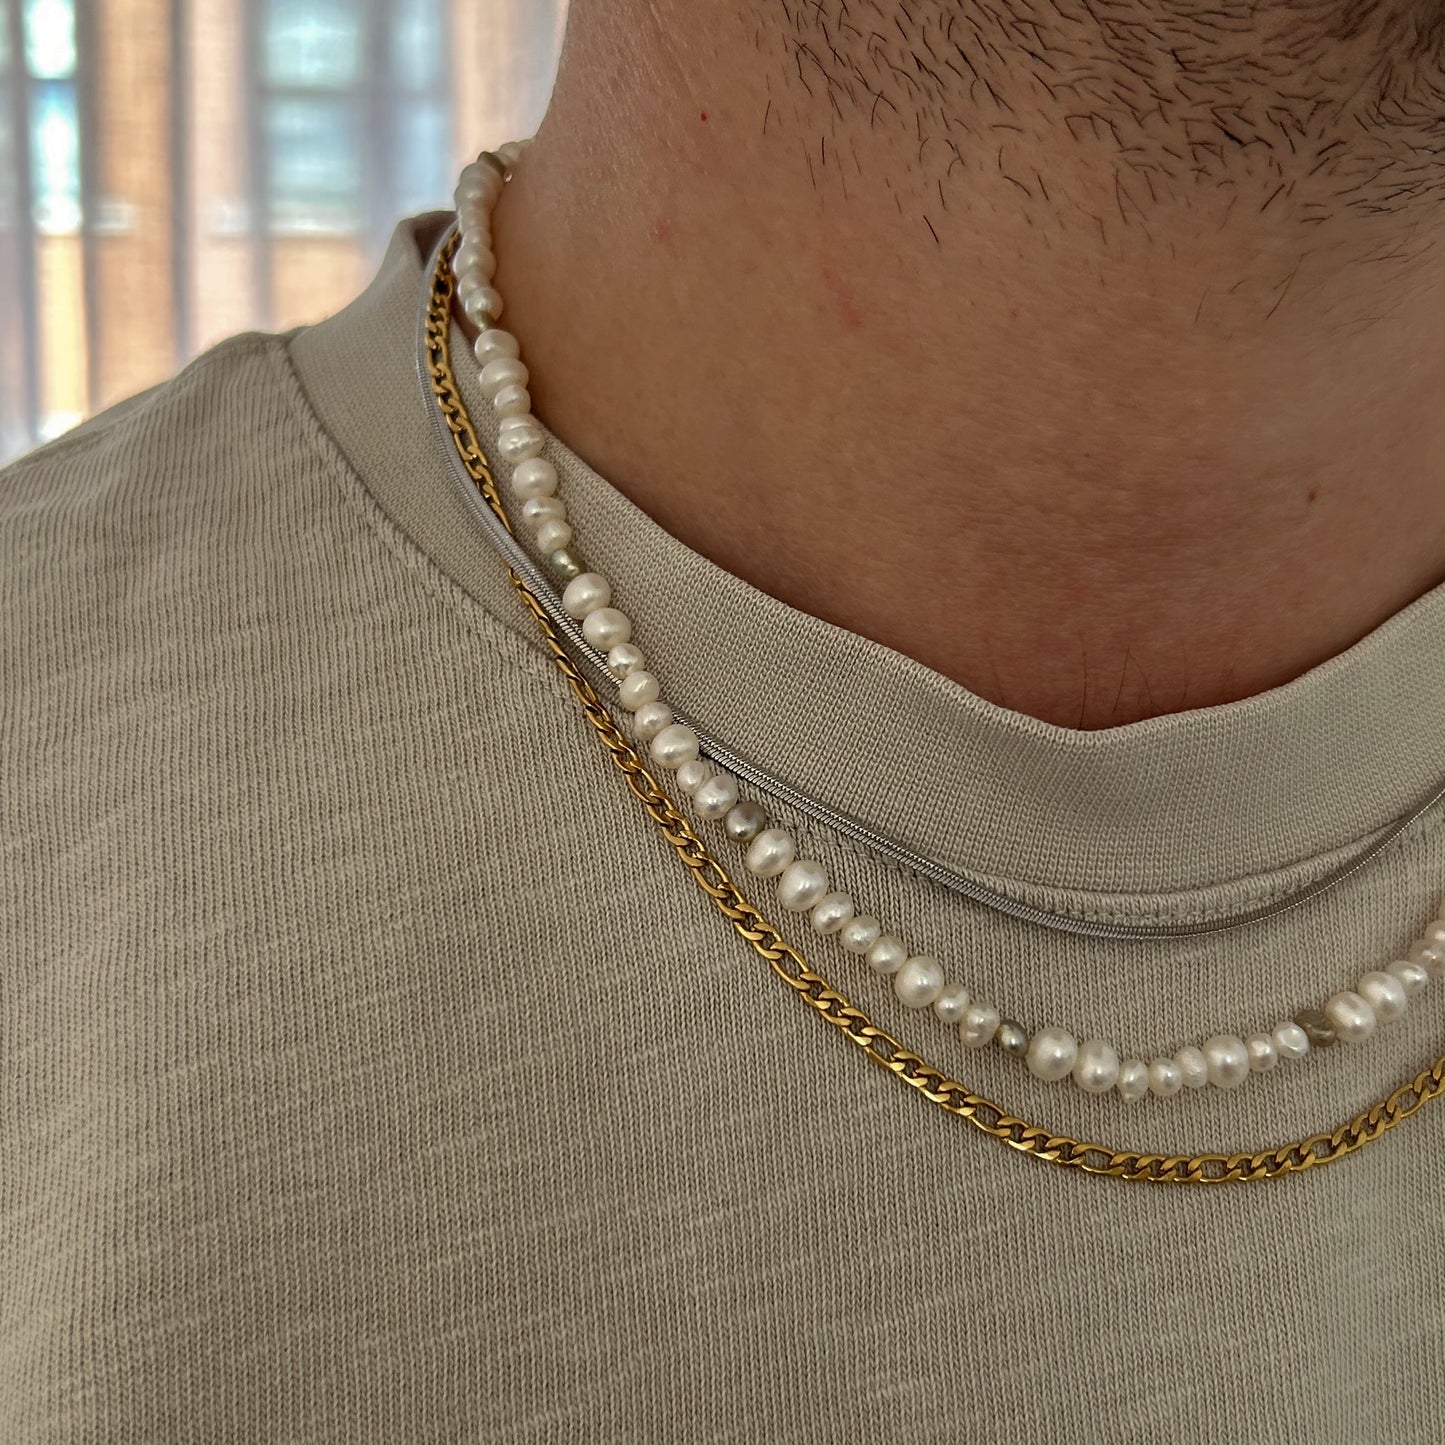 The Realist Necklace